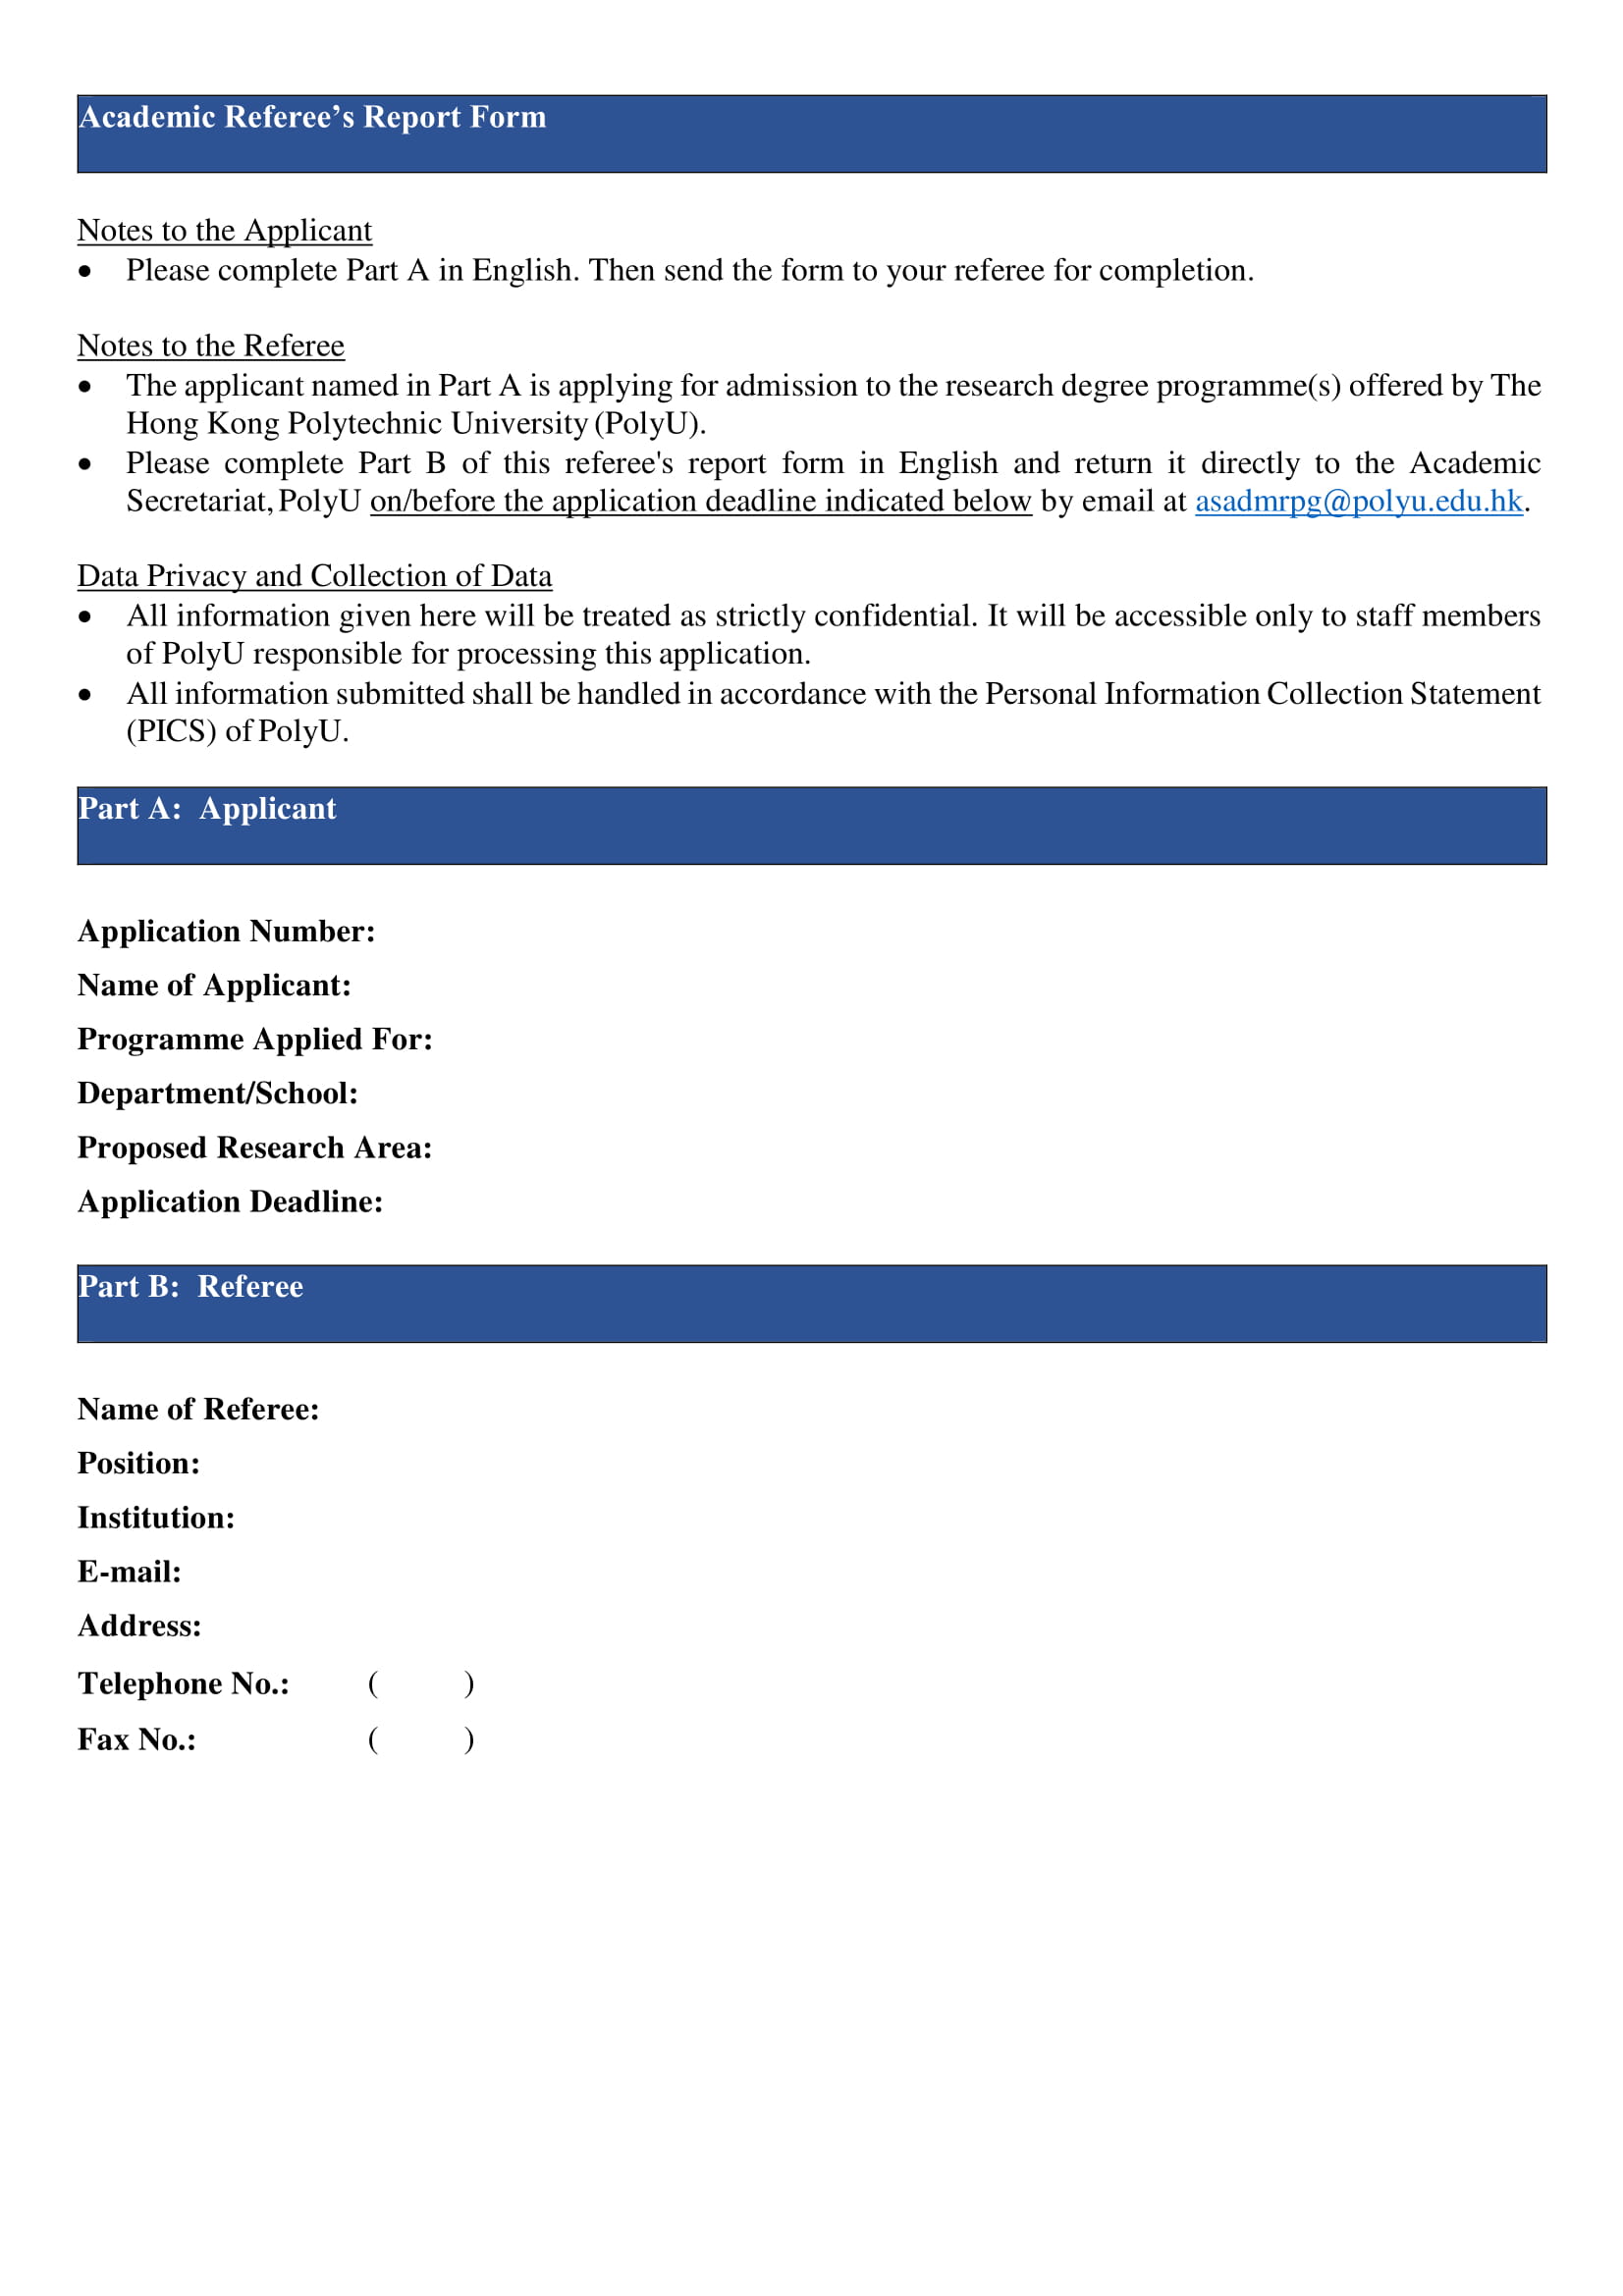 fillable academic referee’s report form 1